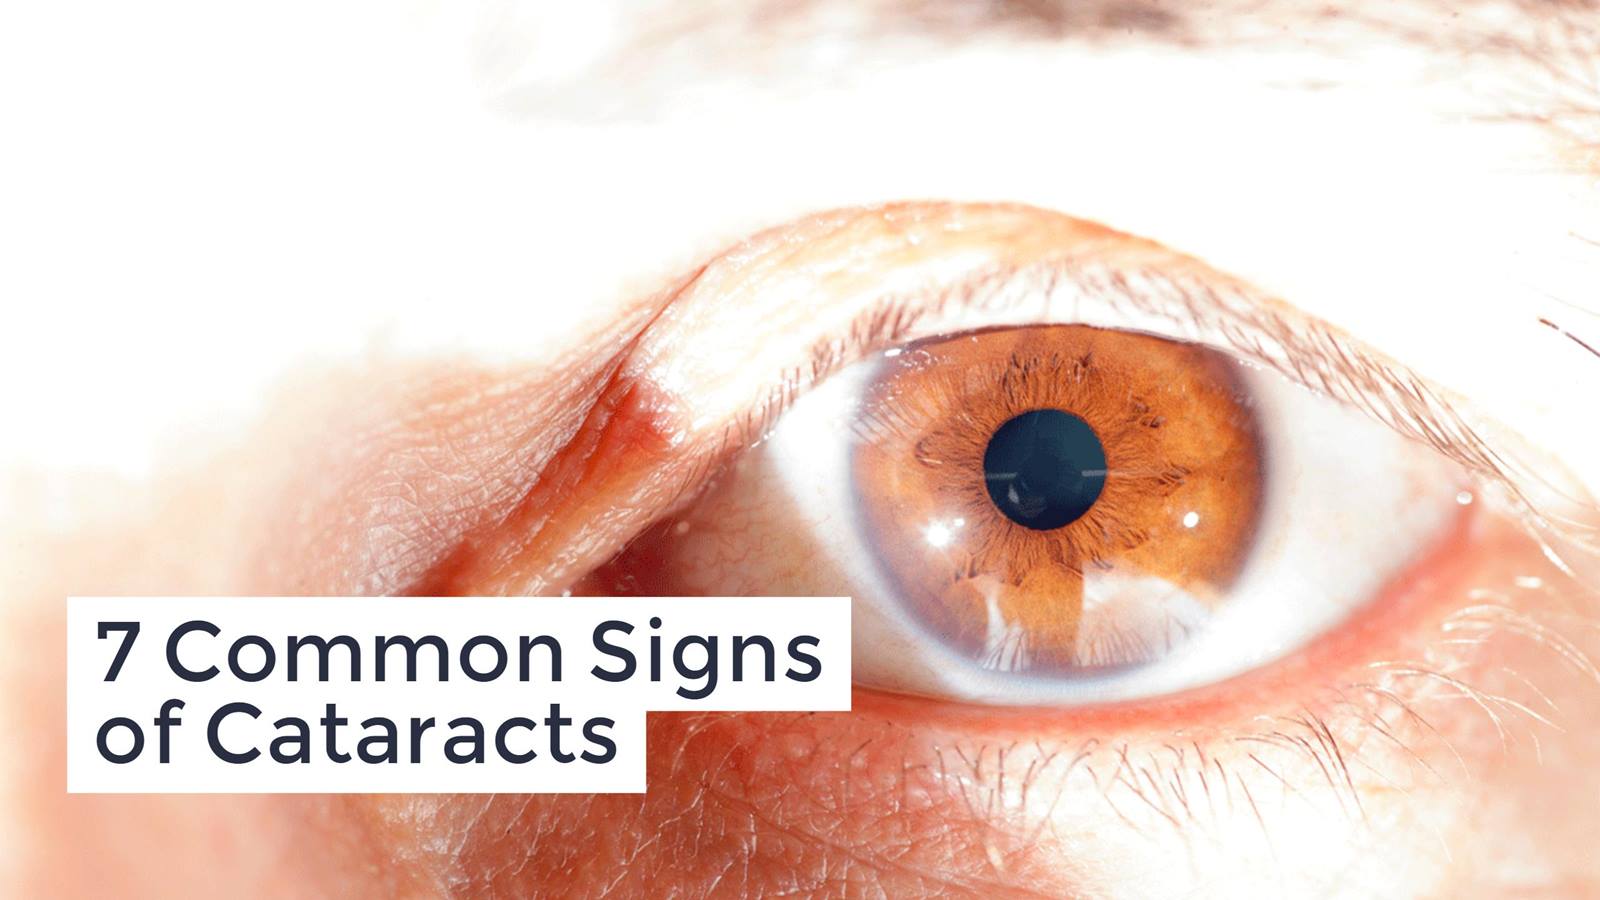 Different Symptoms of Cataracts